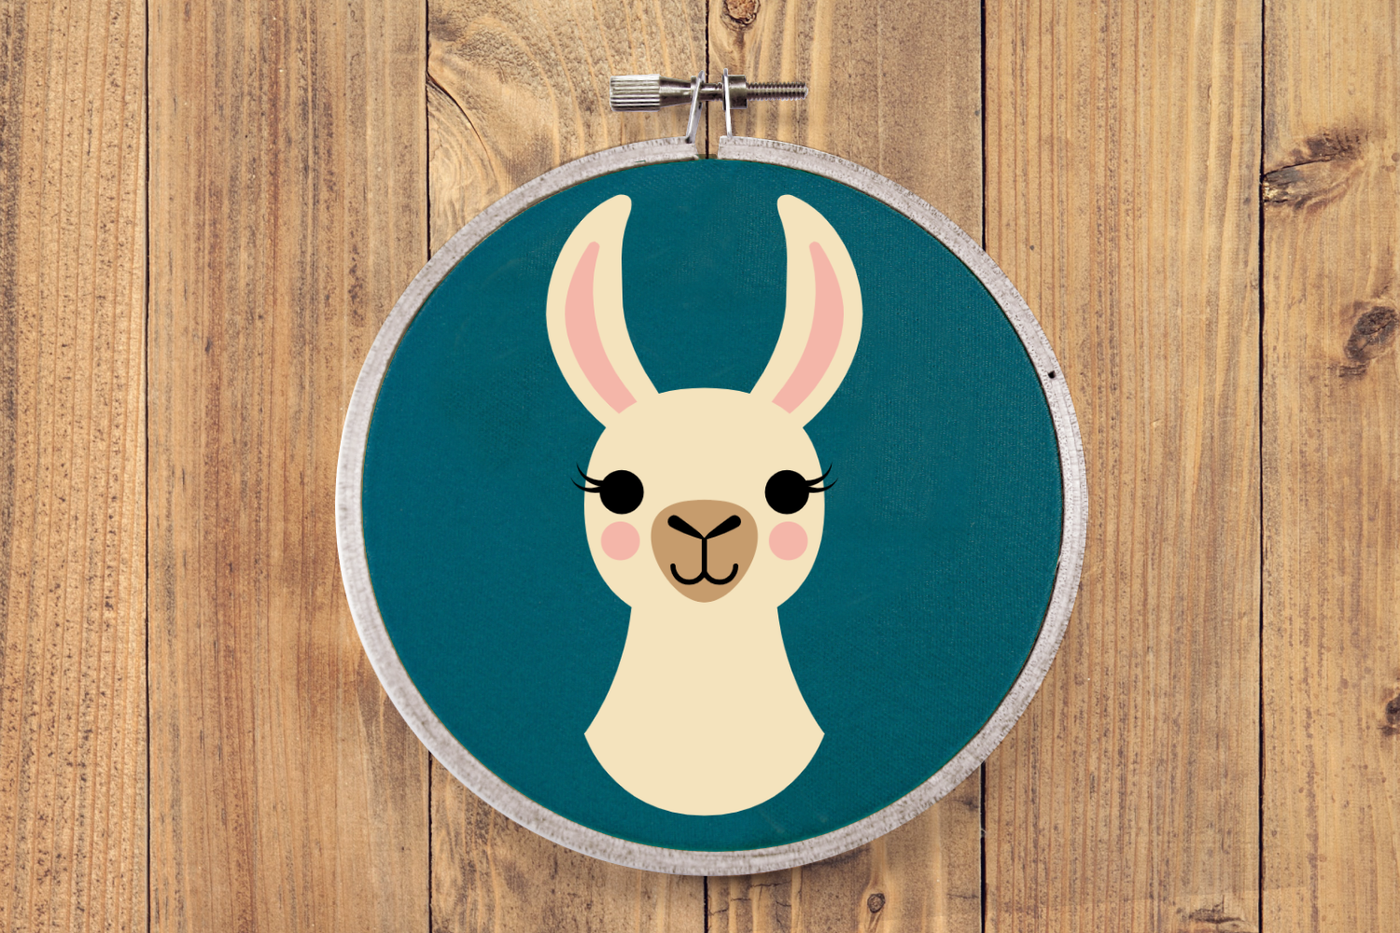 Smiling llama design. Llama is from the neck up.